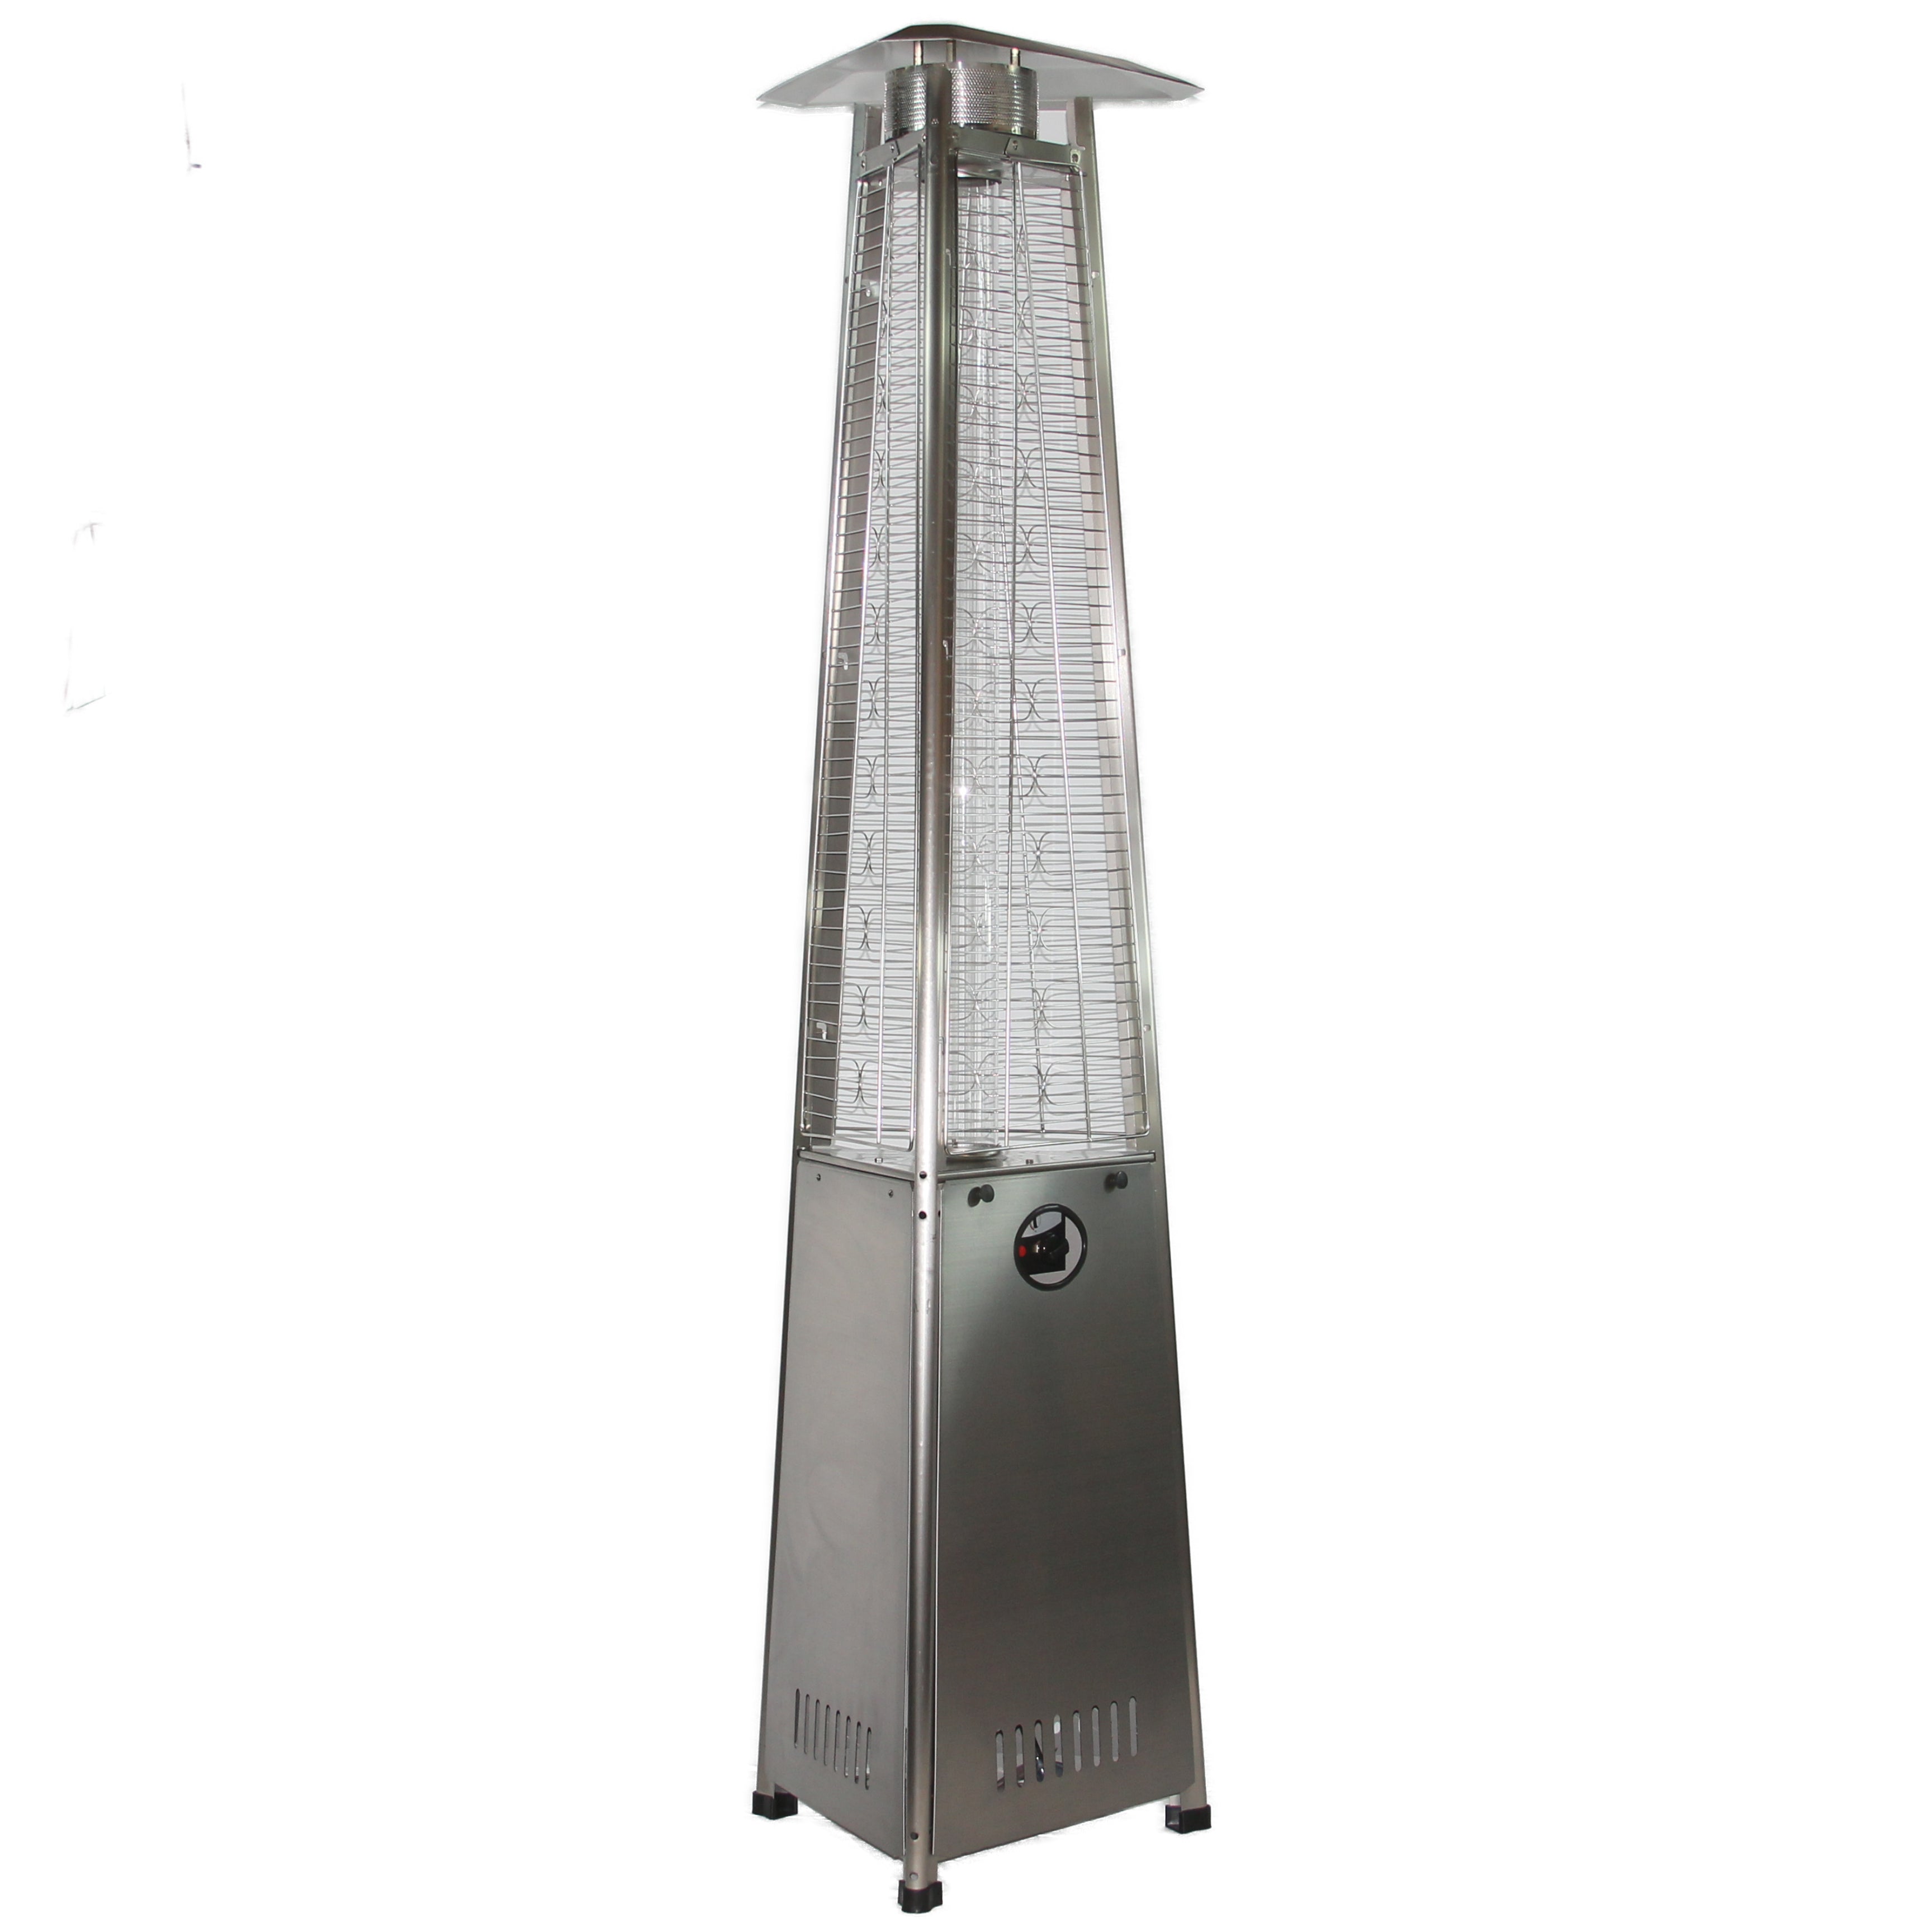 RADtec 93 Pyramid Flame Natural Gas Patio Heater - Stainless Steel Finish 41,000 BTU - 93-NTR-GAS-PYR - Side View